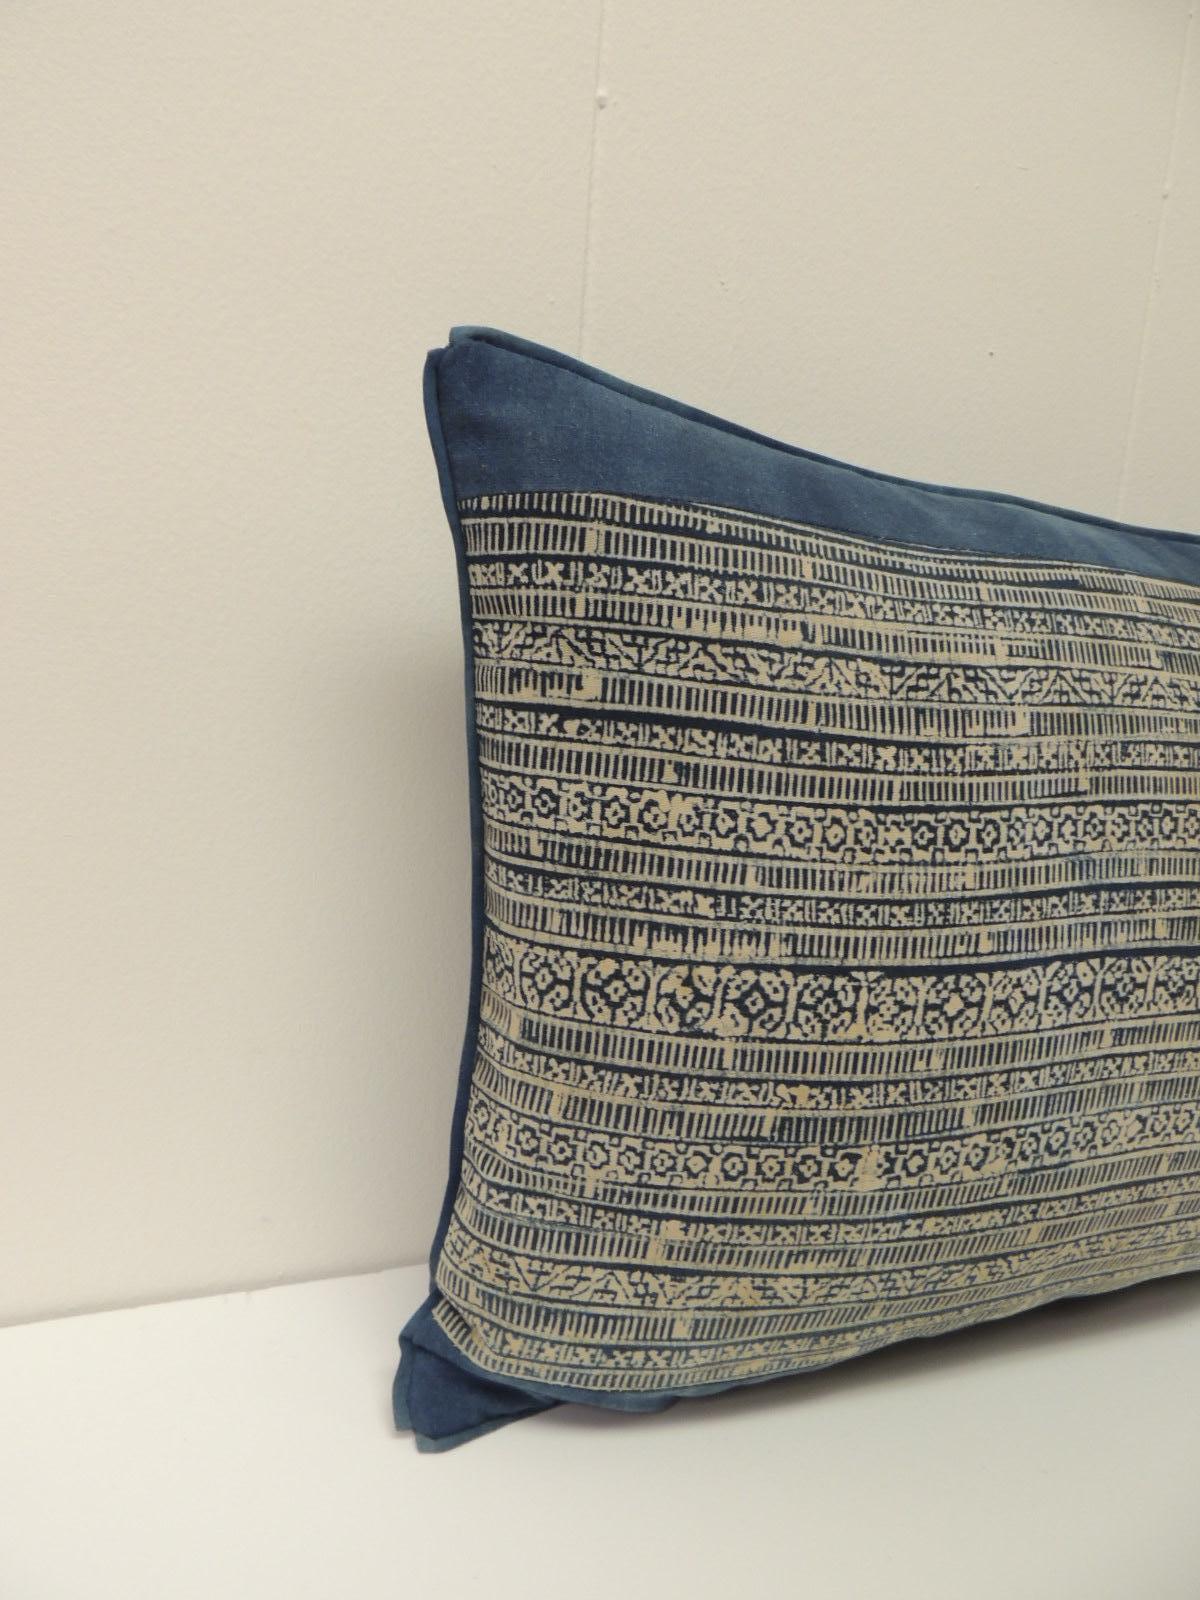 Vintage blue and natural hand-blocked tribal batik Lumbar decorative pillow, framed with same cotton textile and custom ATG blue flat trim.
Backed with slate blue woven linen.
Decorative pillow handcrafted and designed in the USA. Closure by